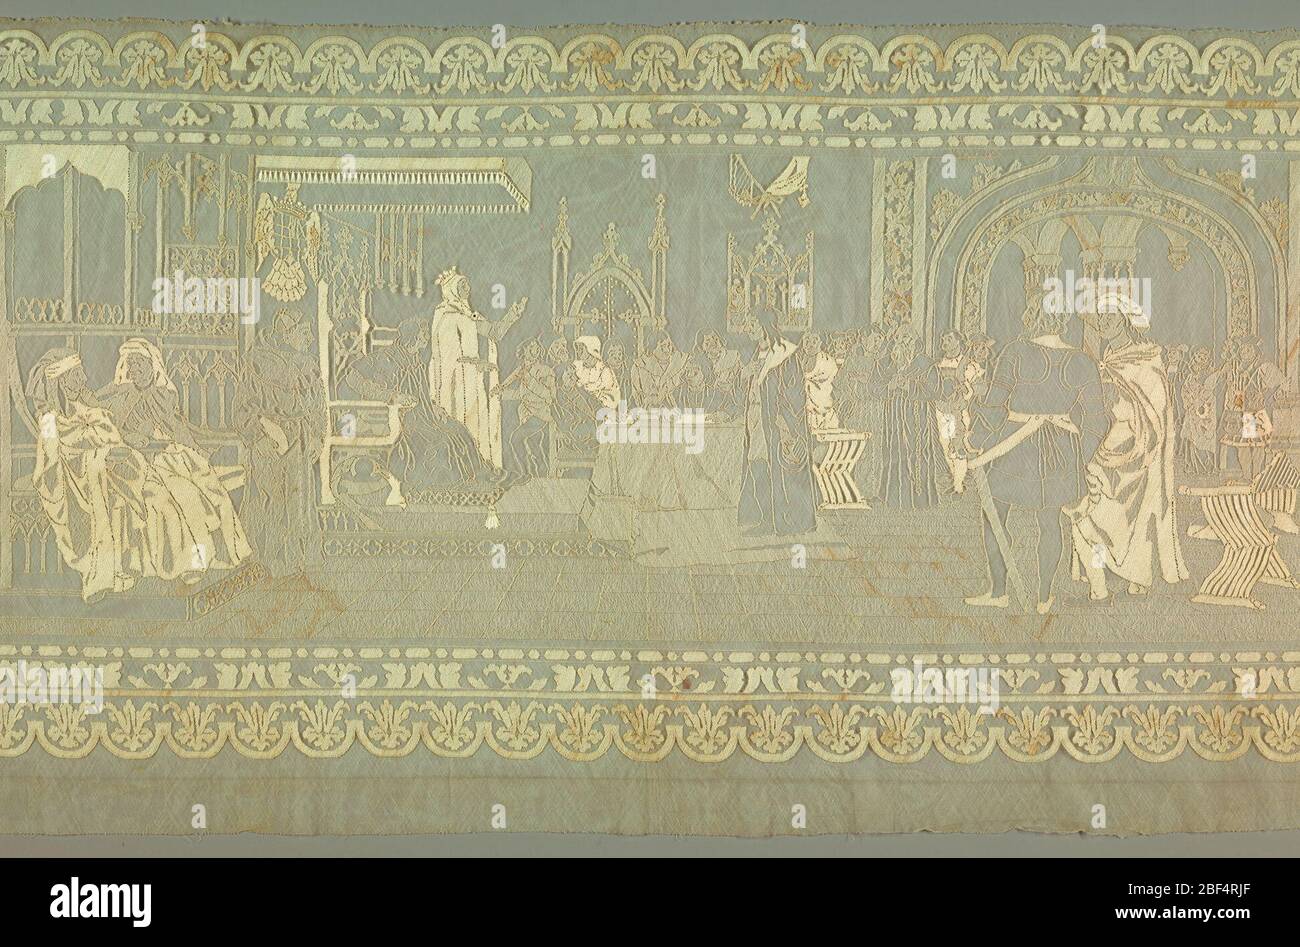 Panel. Design showing Columbus at the Court of Spain and three borders representing architectural mouldings. Stock Photo